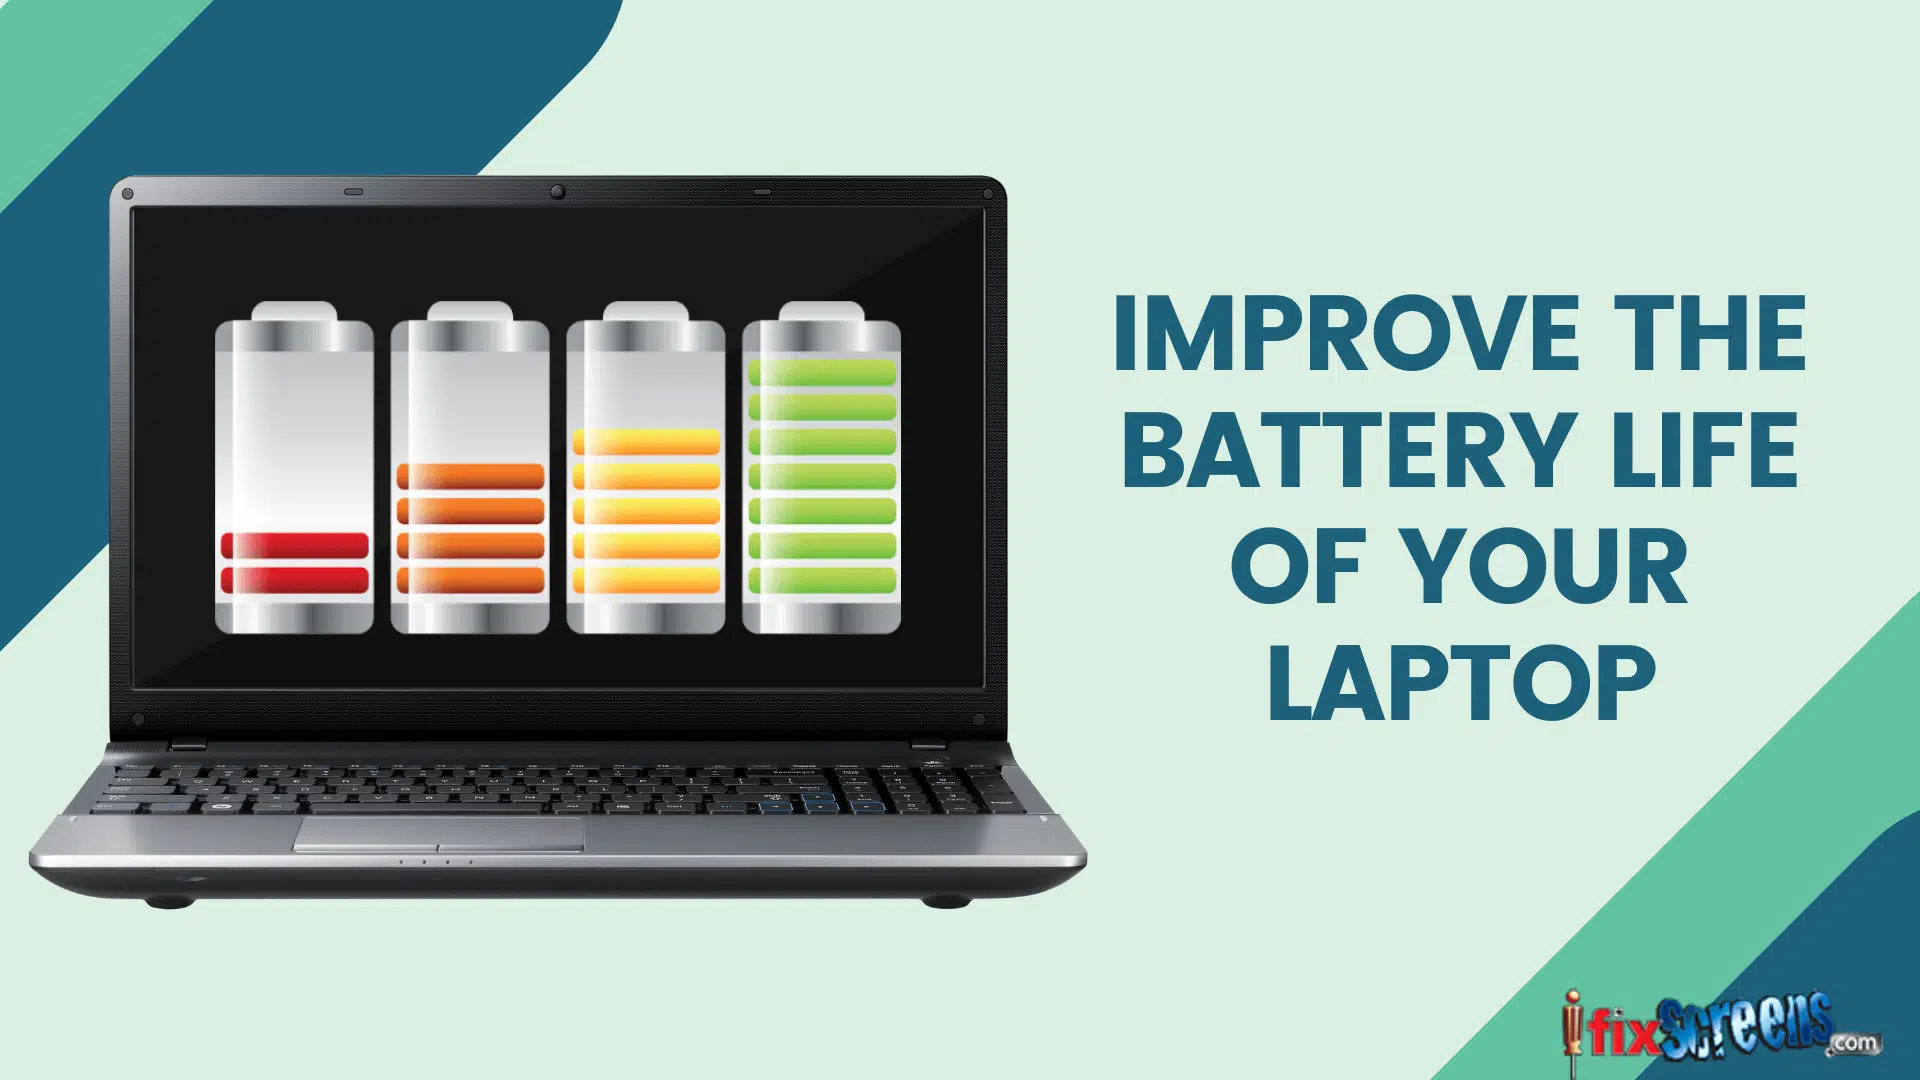 7 Ways To Improve The Battery Life Of Your Laptop